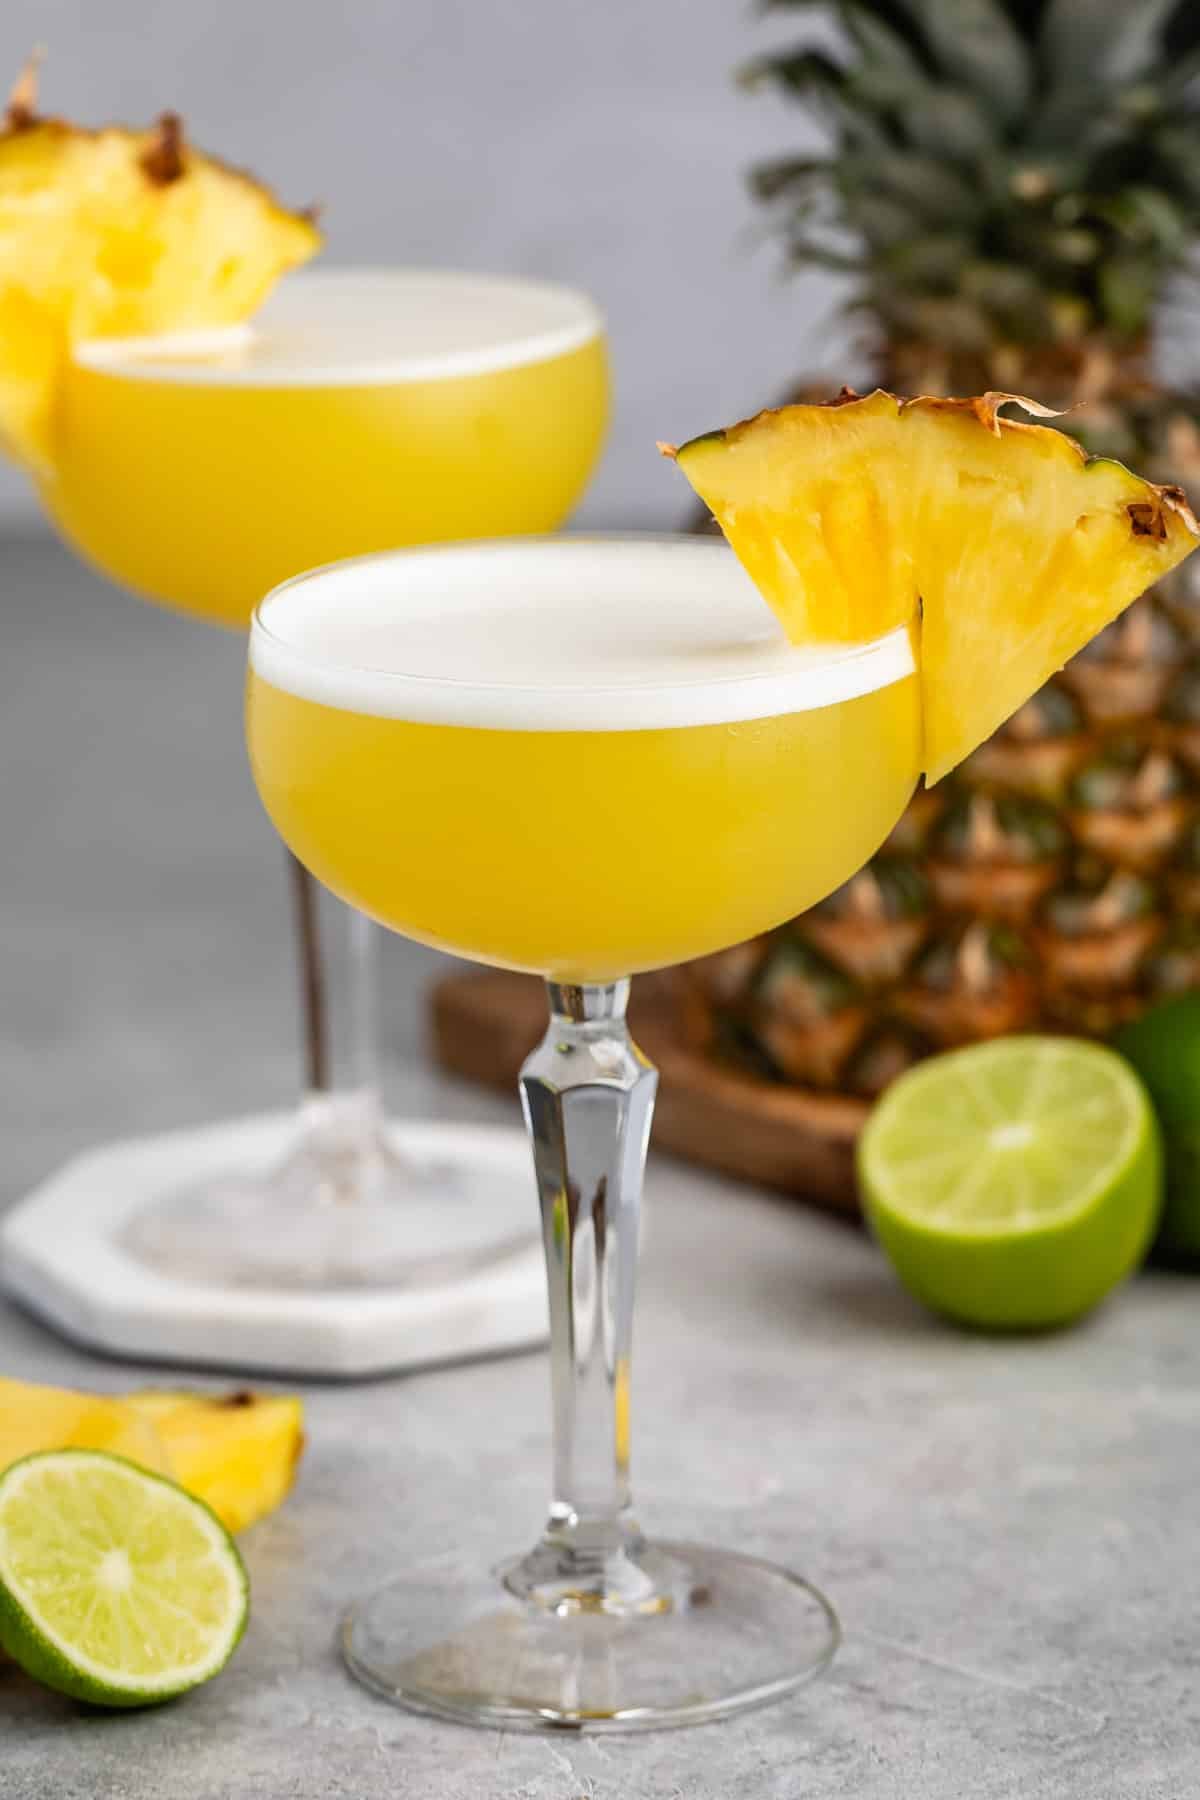 tall clear martini glass holding a yellow drink with a pineapple slice on the rim.